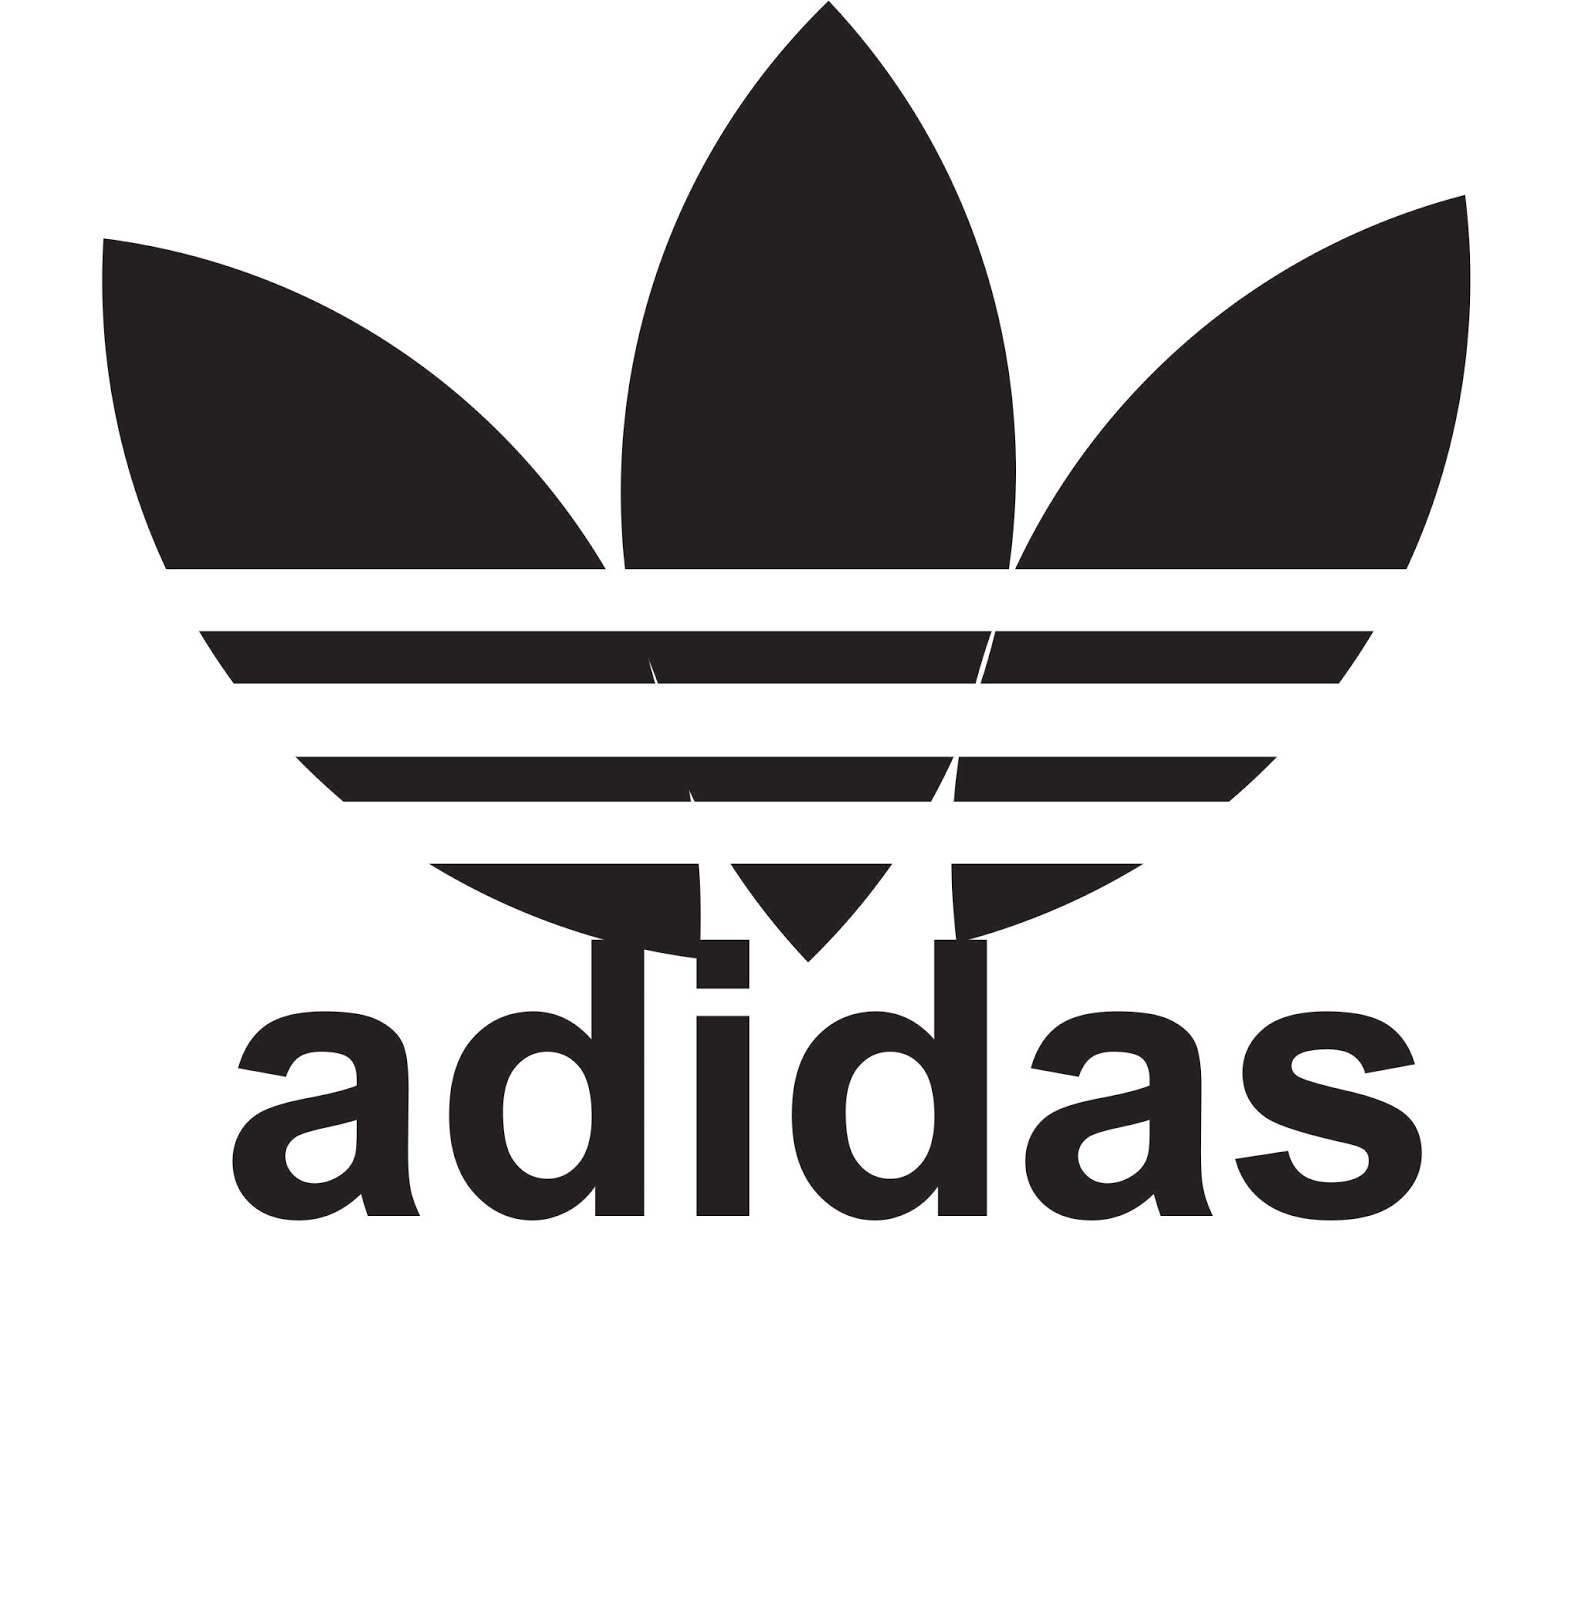 Adidas Logo Cliparts - Add Style to Your Designs with the Iconic Adidas ...